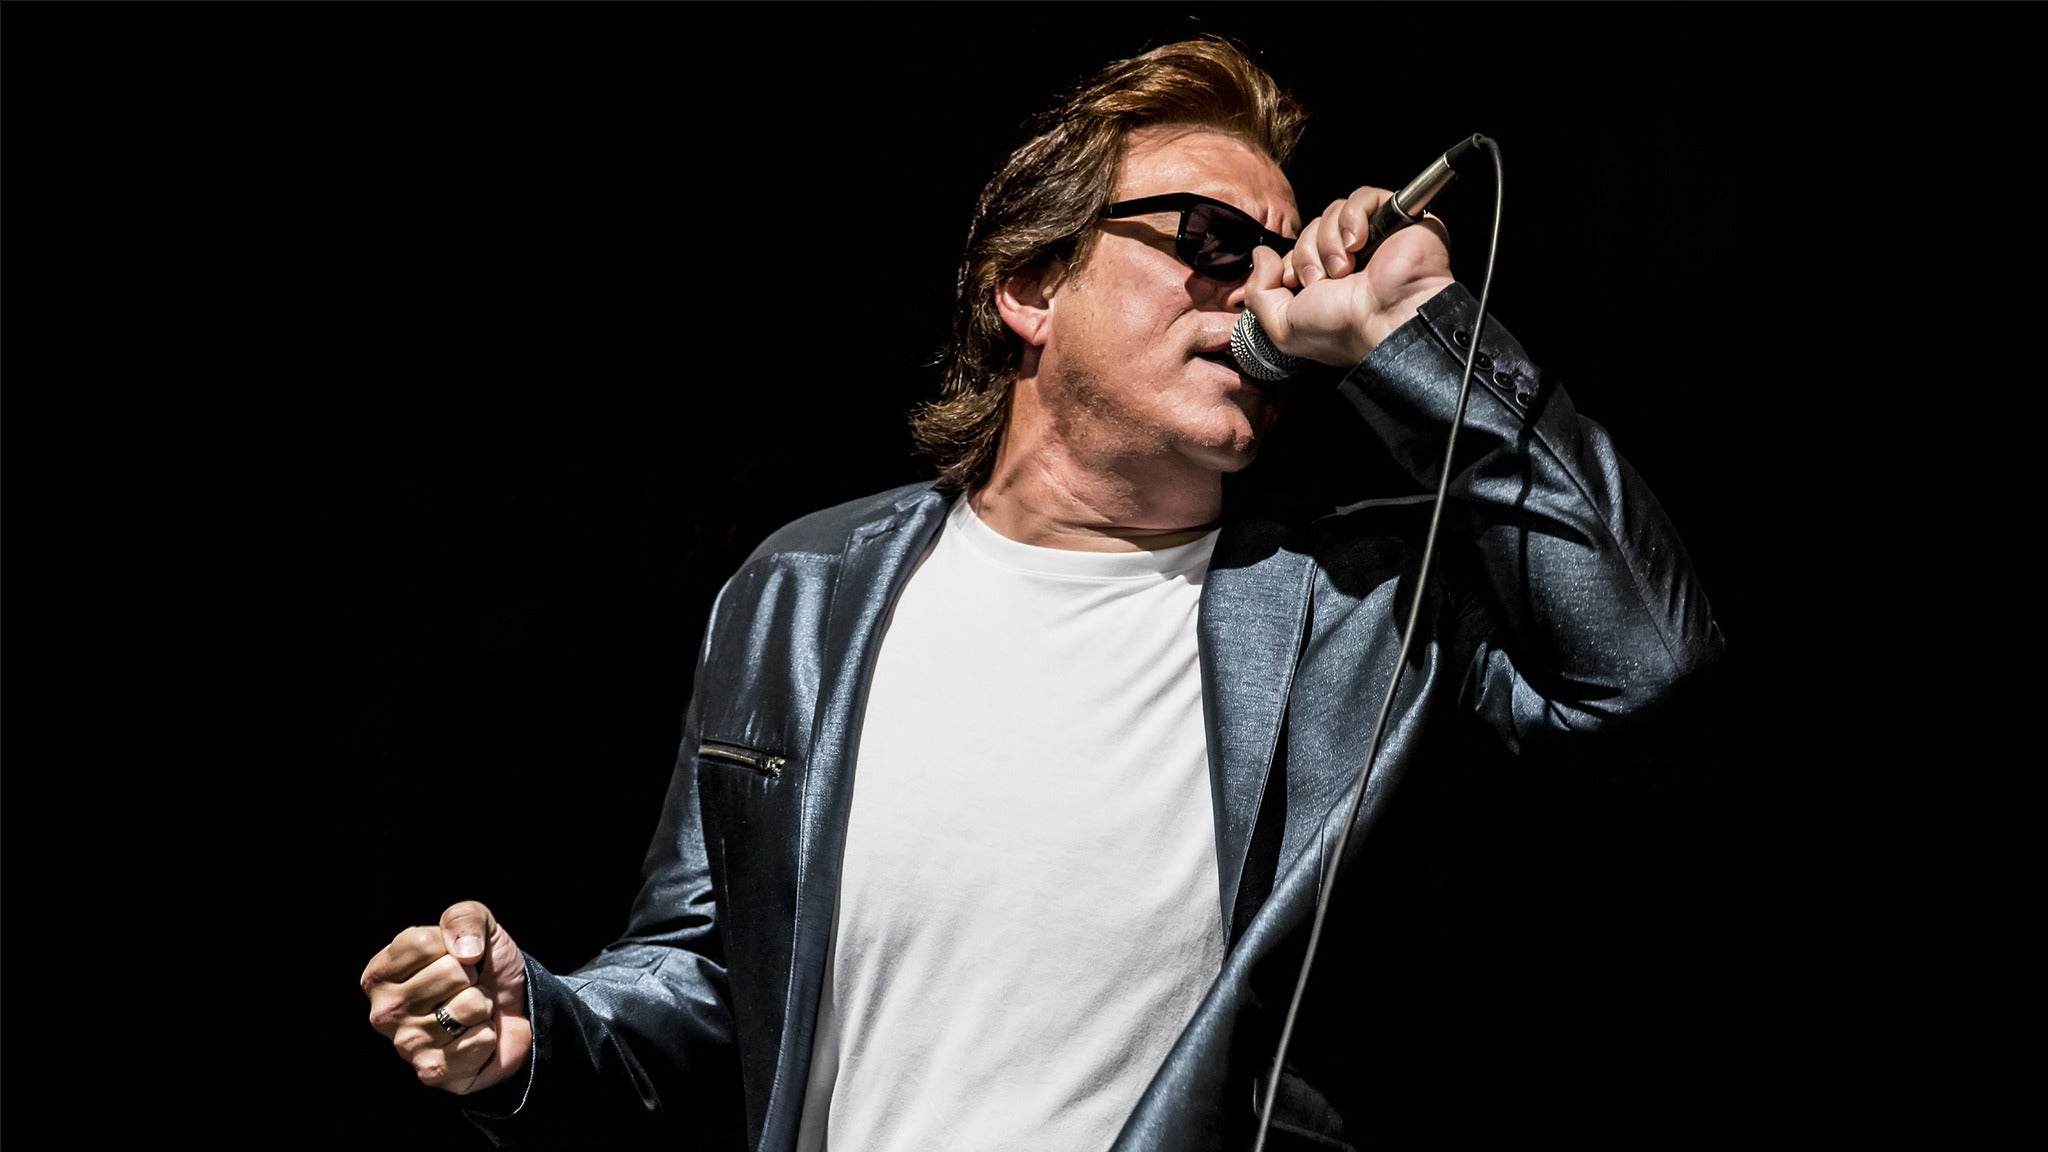 The Heart Of Rock & Roll A Tribute To Huey Lewis & The News Tickets